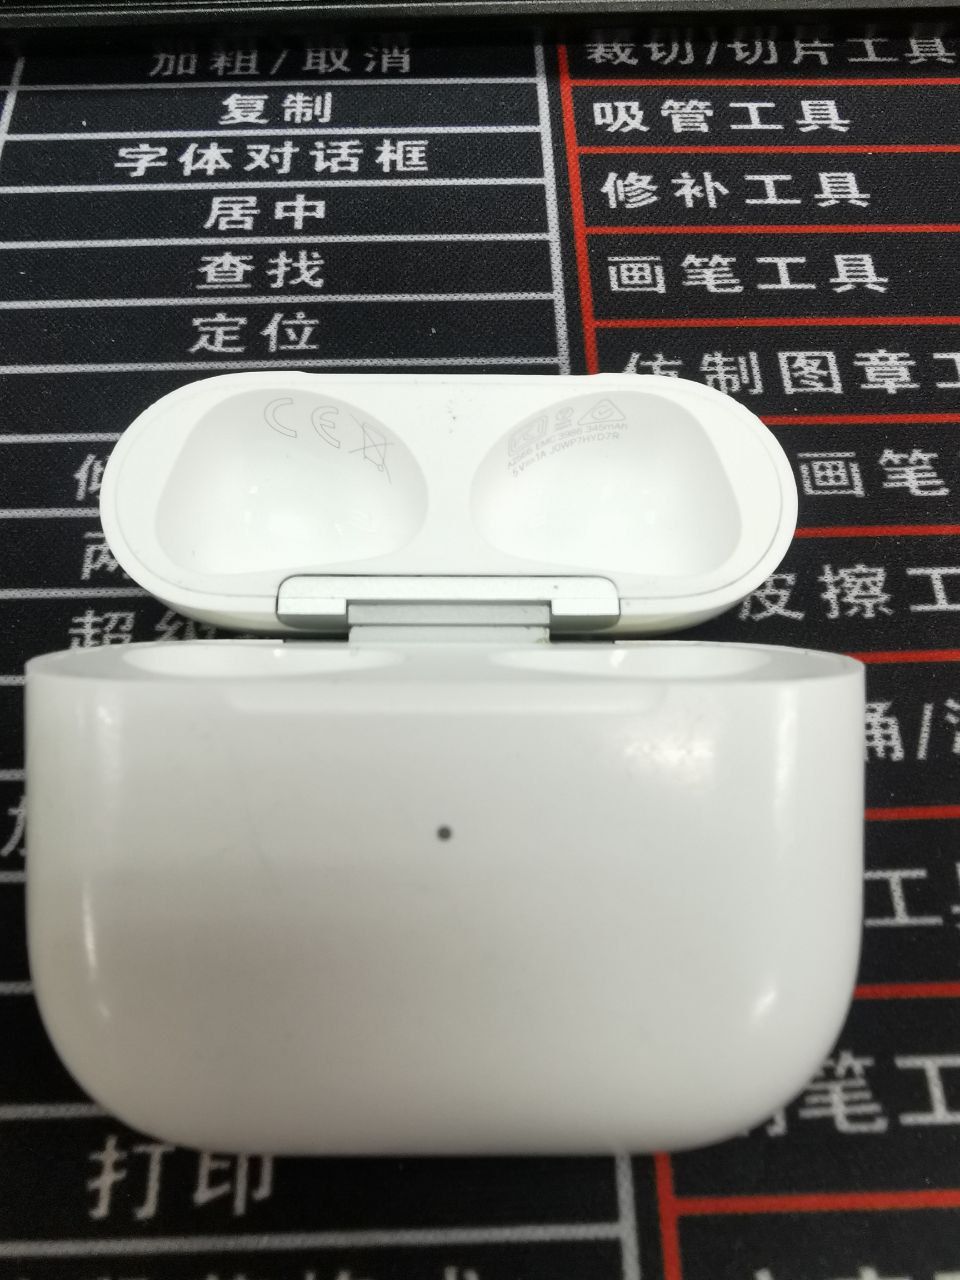 AirPods 第3代 MagSafe 充電盒（A2566/Ligtning介面）